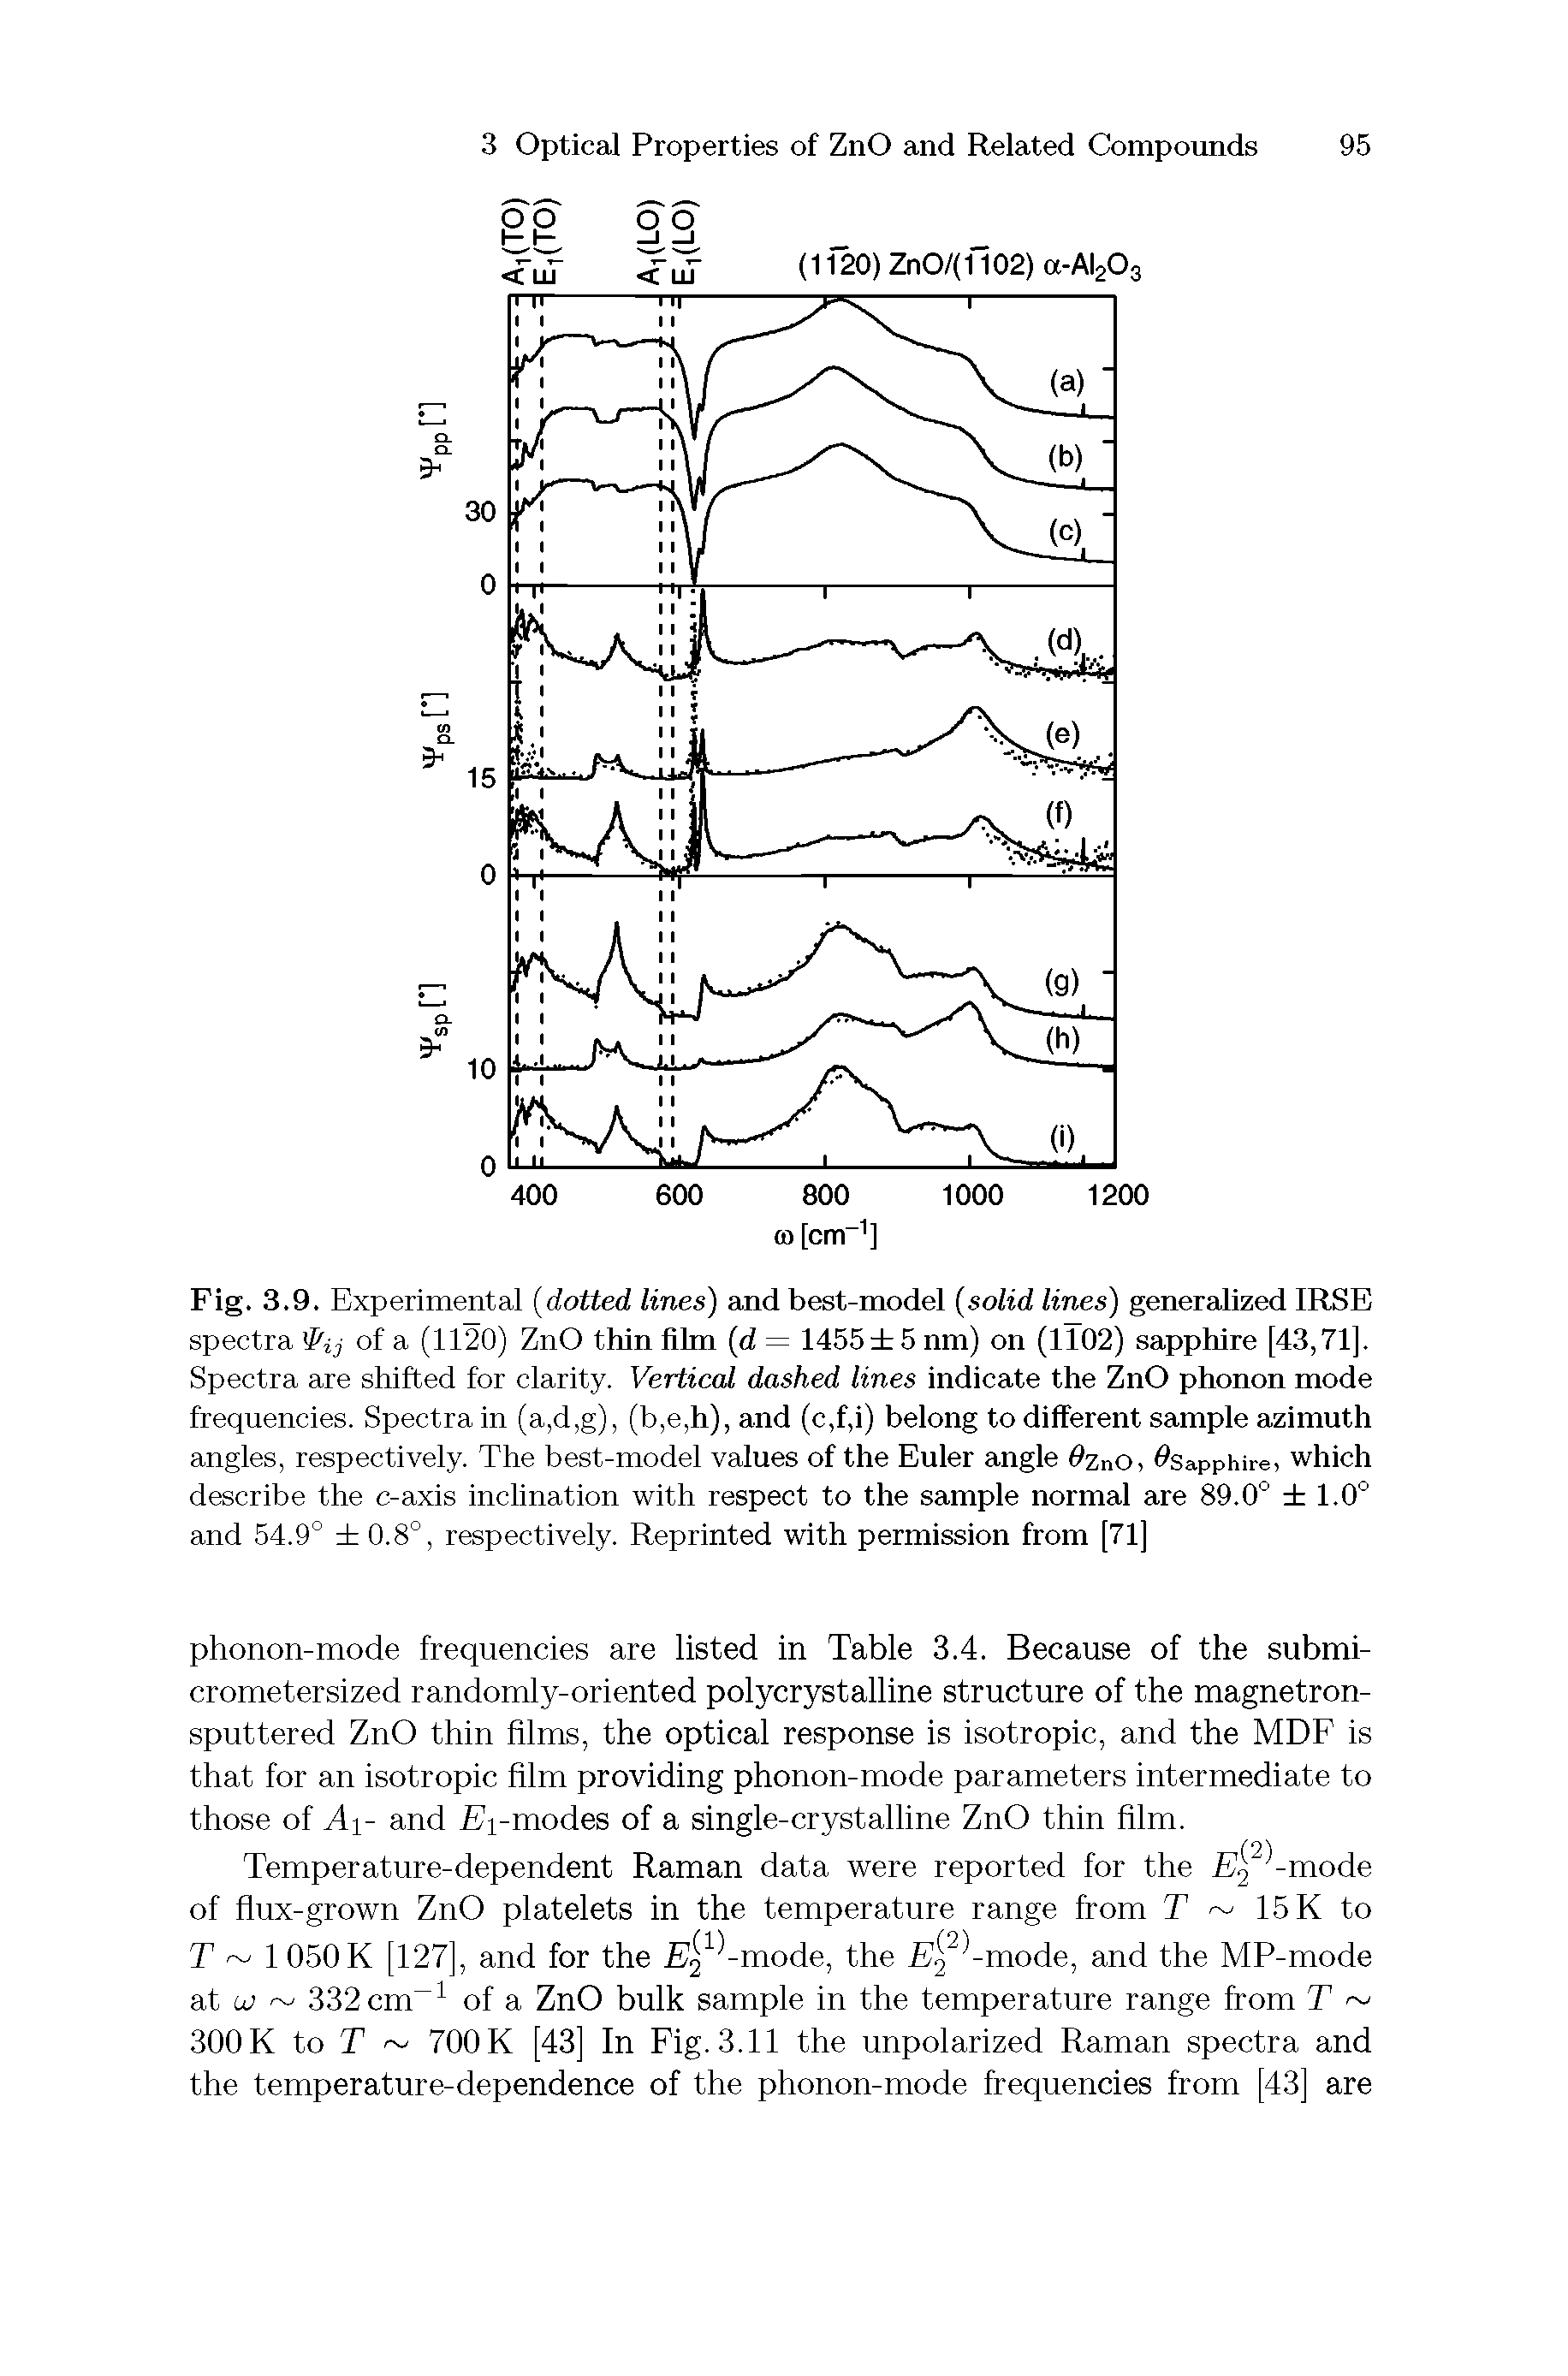 Fig. 3.9. Experimental (dotted lines) and best-model (solid lines) generalized IRSE spectra J ij of a (1120) ZnO thin film (d = 1455 5 nm) on (1102) sapphire [43,71]. Spectra are shifted for clarity. Vertical dashed lines indicate the ZnO phonon mode frequencies. Spectra in (a,d,g), (b,e,h), and (c,f,i) belong to different sample azimuth angles, respectively. The best-model values of the Euler angle 0znO, Sapphire, which describe the c-axis inclination with respect to the sample normal are 89.0° 1.0° and 54.9° 0.8°, respectively. Reprinted with permission from [71]...